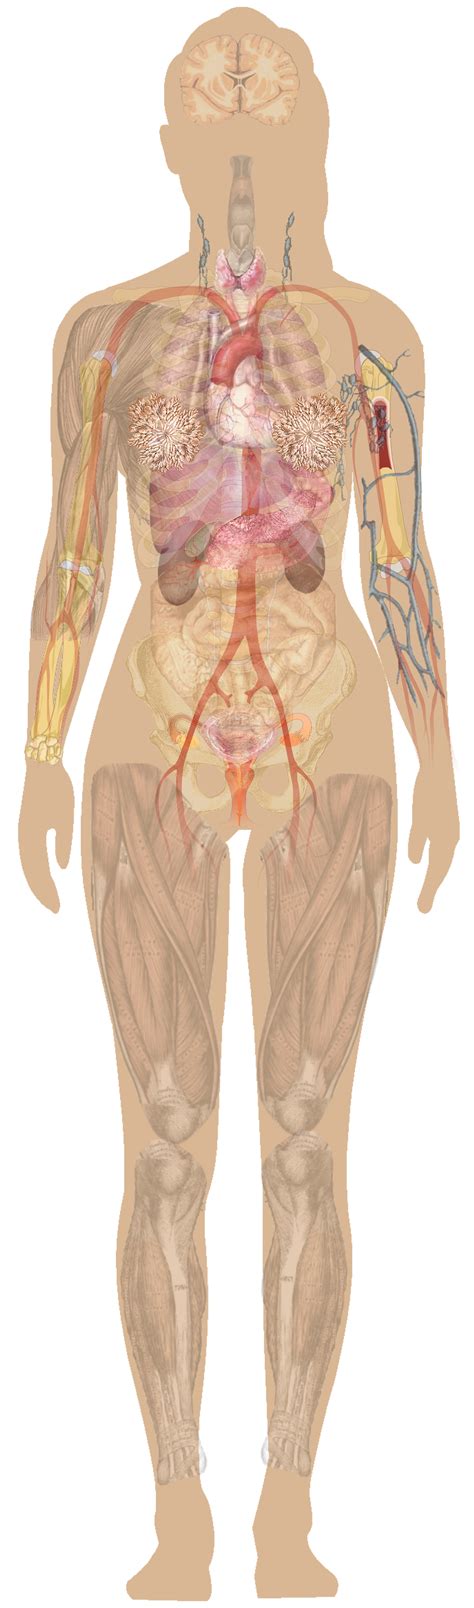 This muscle group is responsible for pushing movements and interacts synergistically with the anterior. Some detail on human anatomy woman | Human anatomy female ...